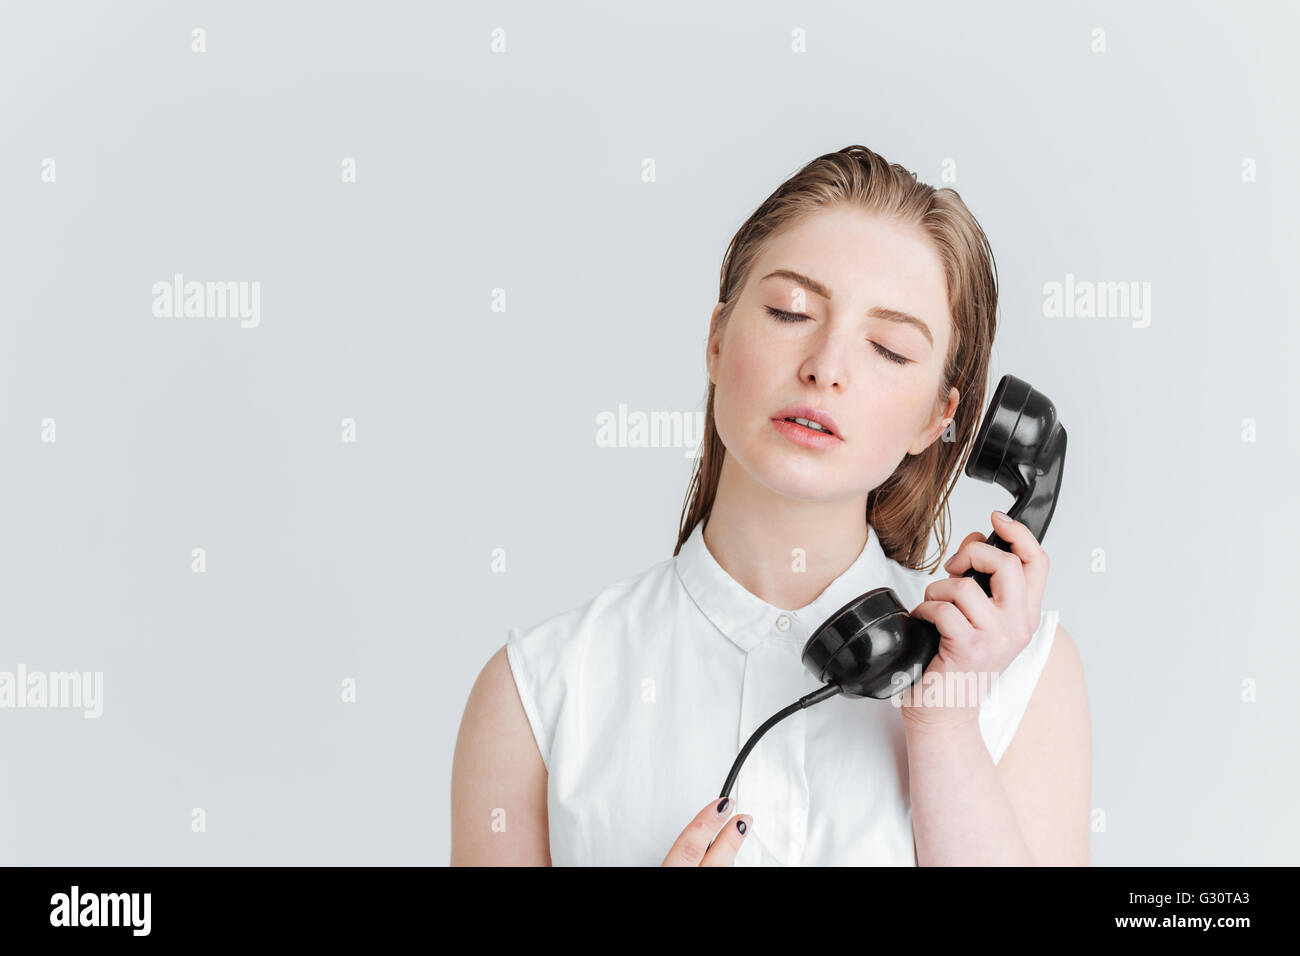 Relaxed woman with closed eyes holding retro phone tube isolé sur fond blanc Banque D'Images